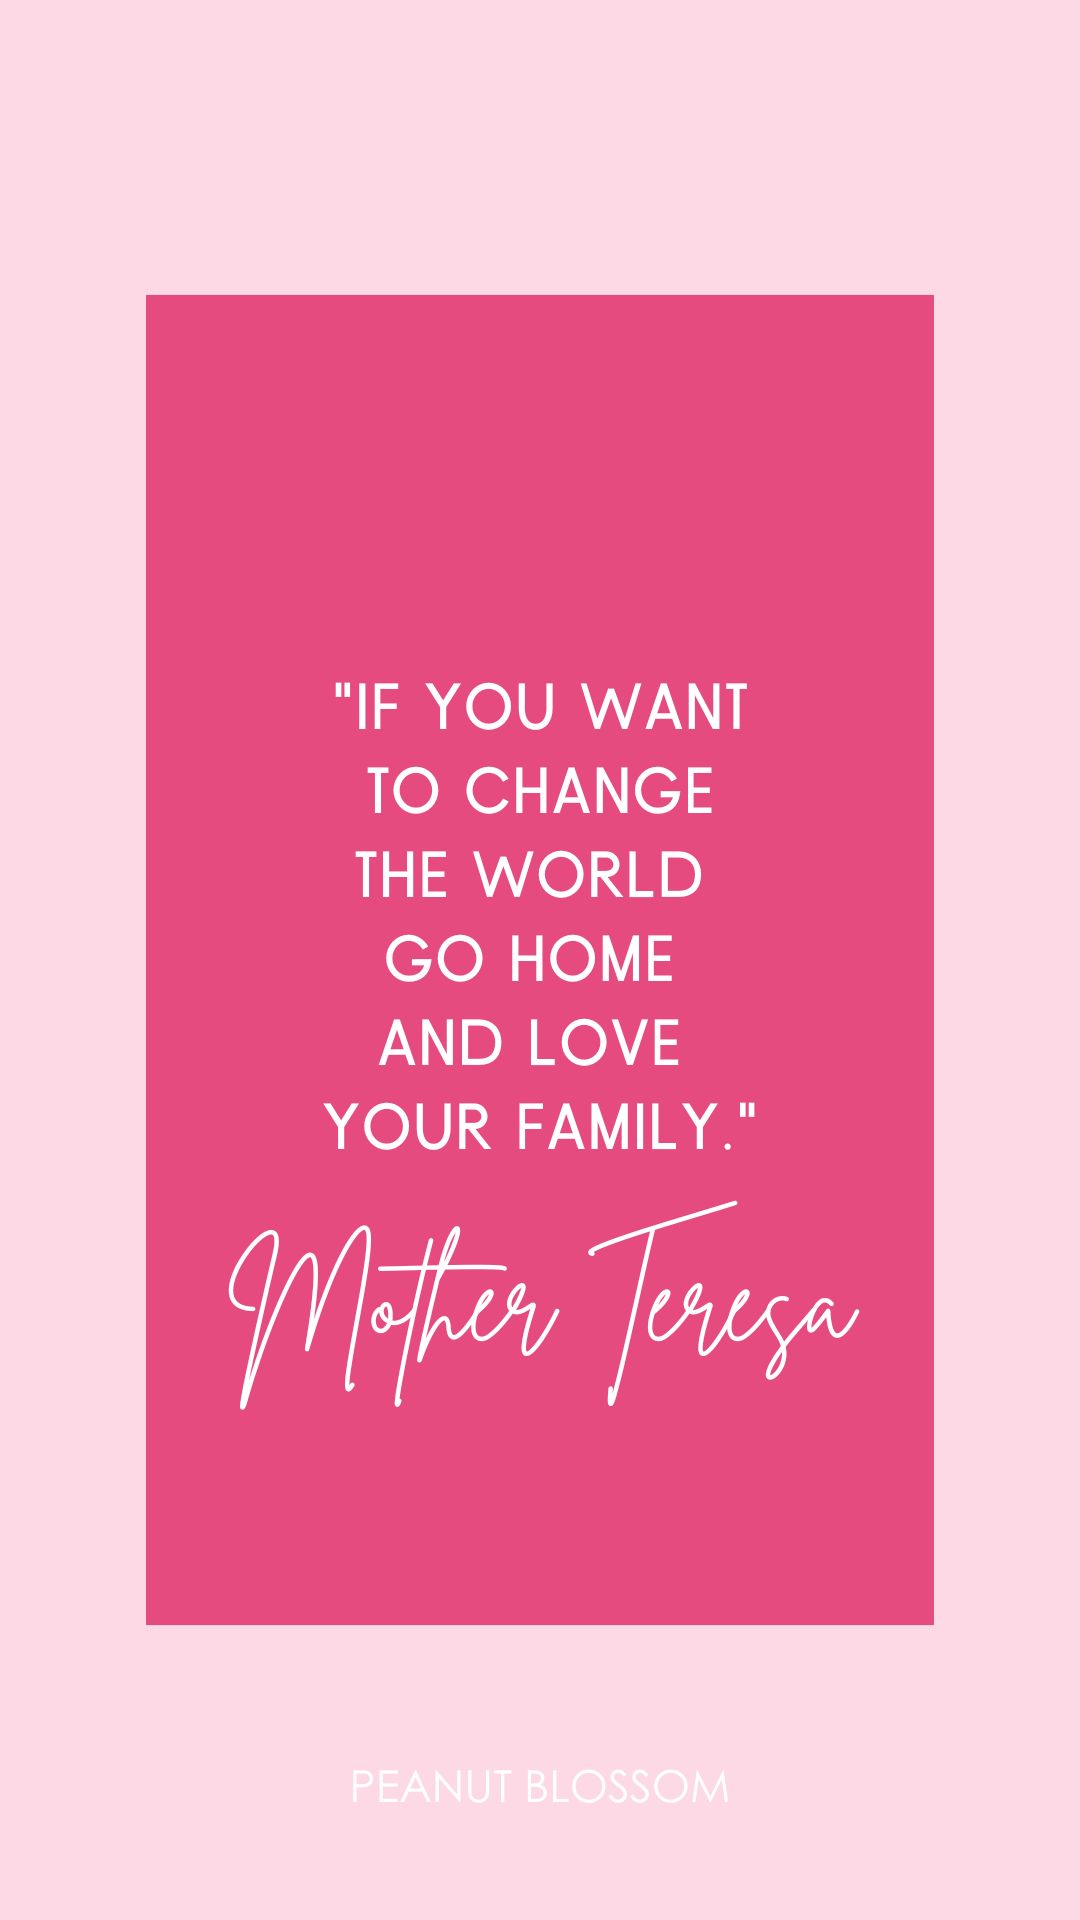 The Mother Teresa quote: "If you want to change the world, go home and love your family."